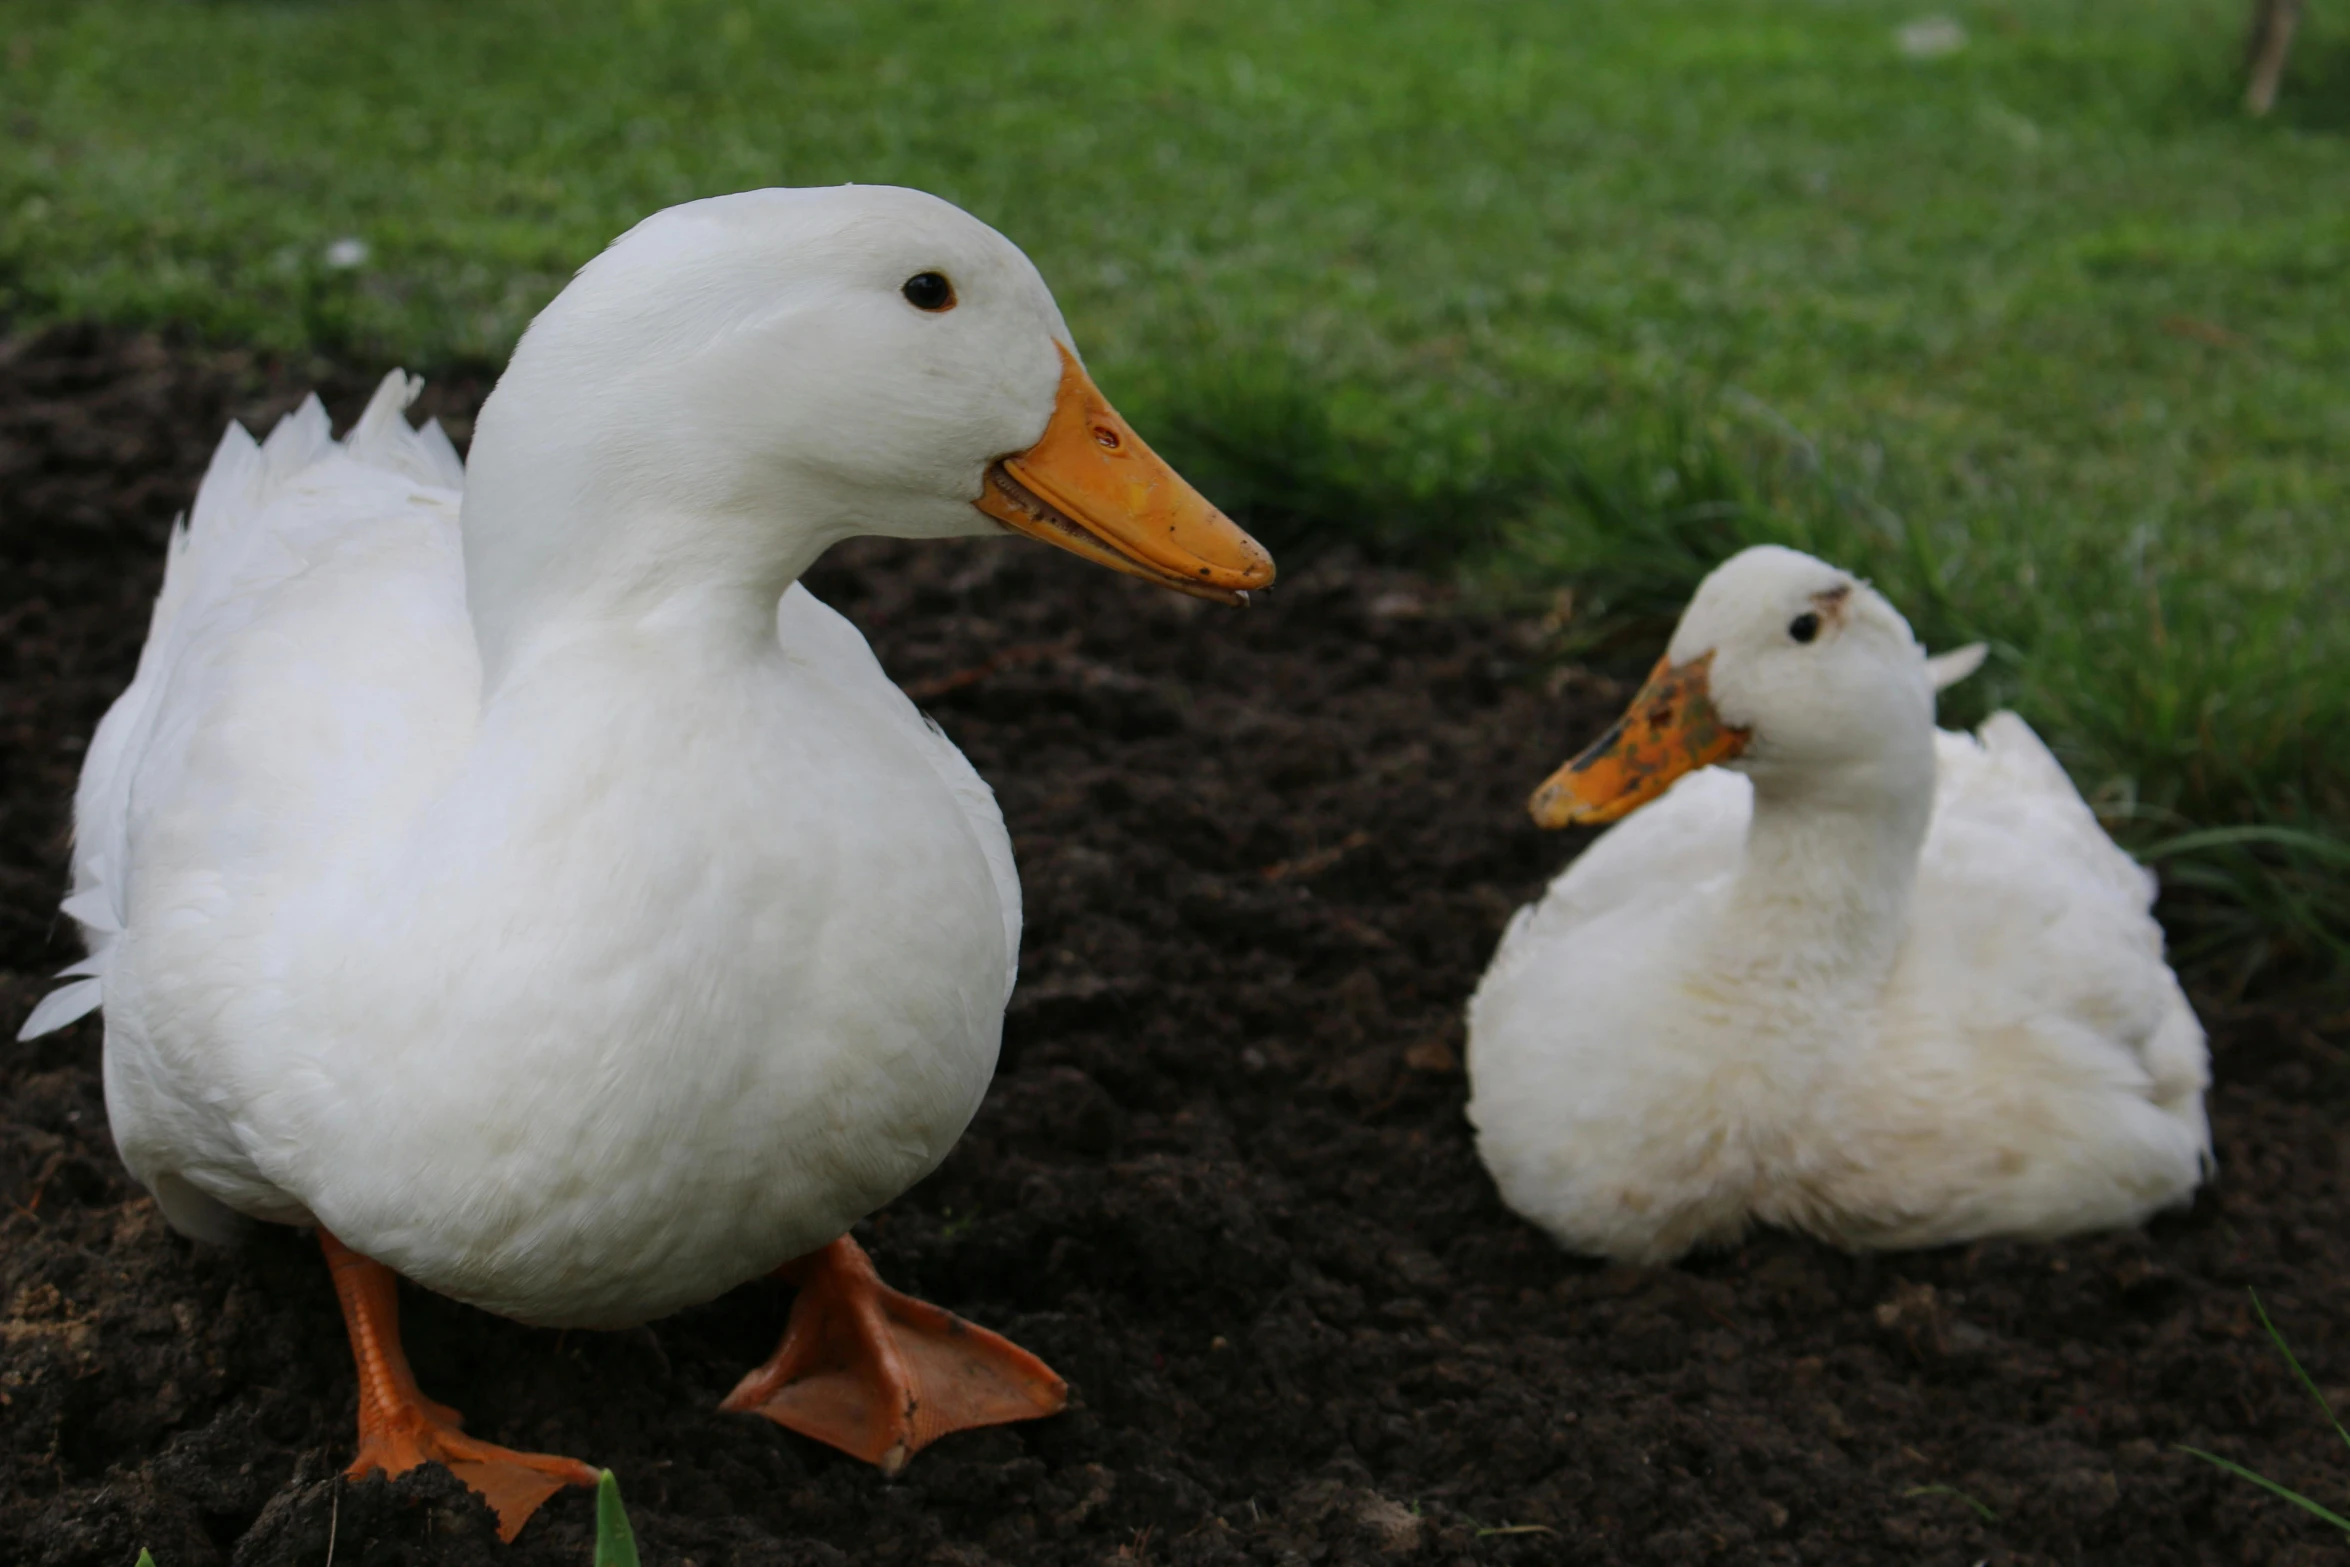 a pair of white ducks sit on the ground